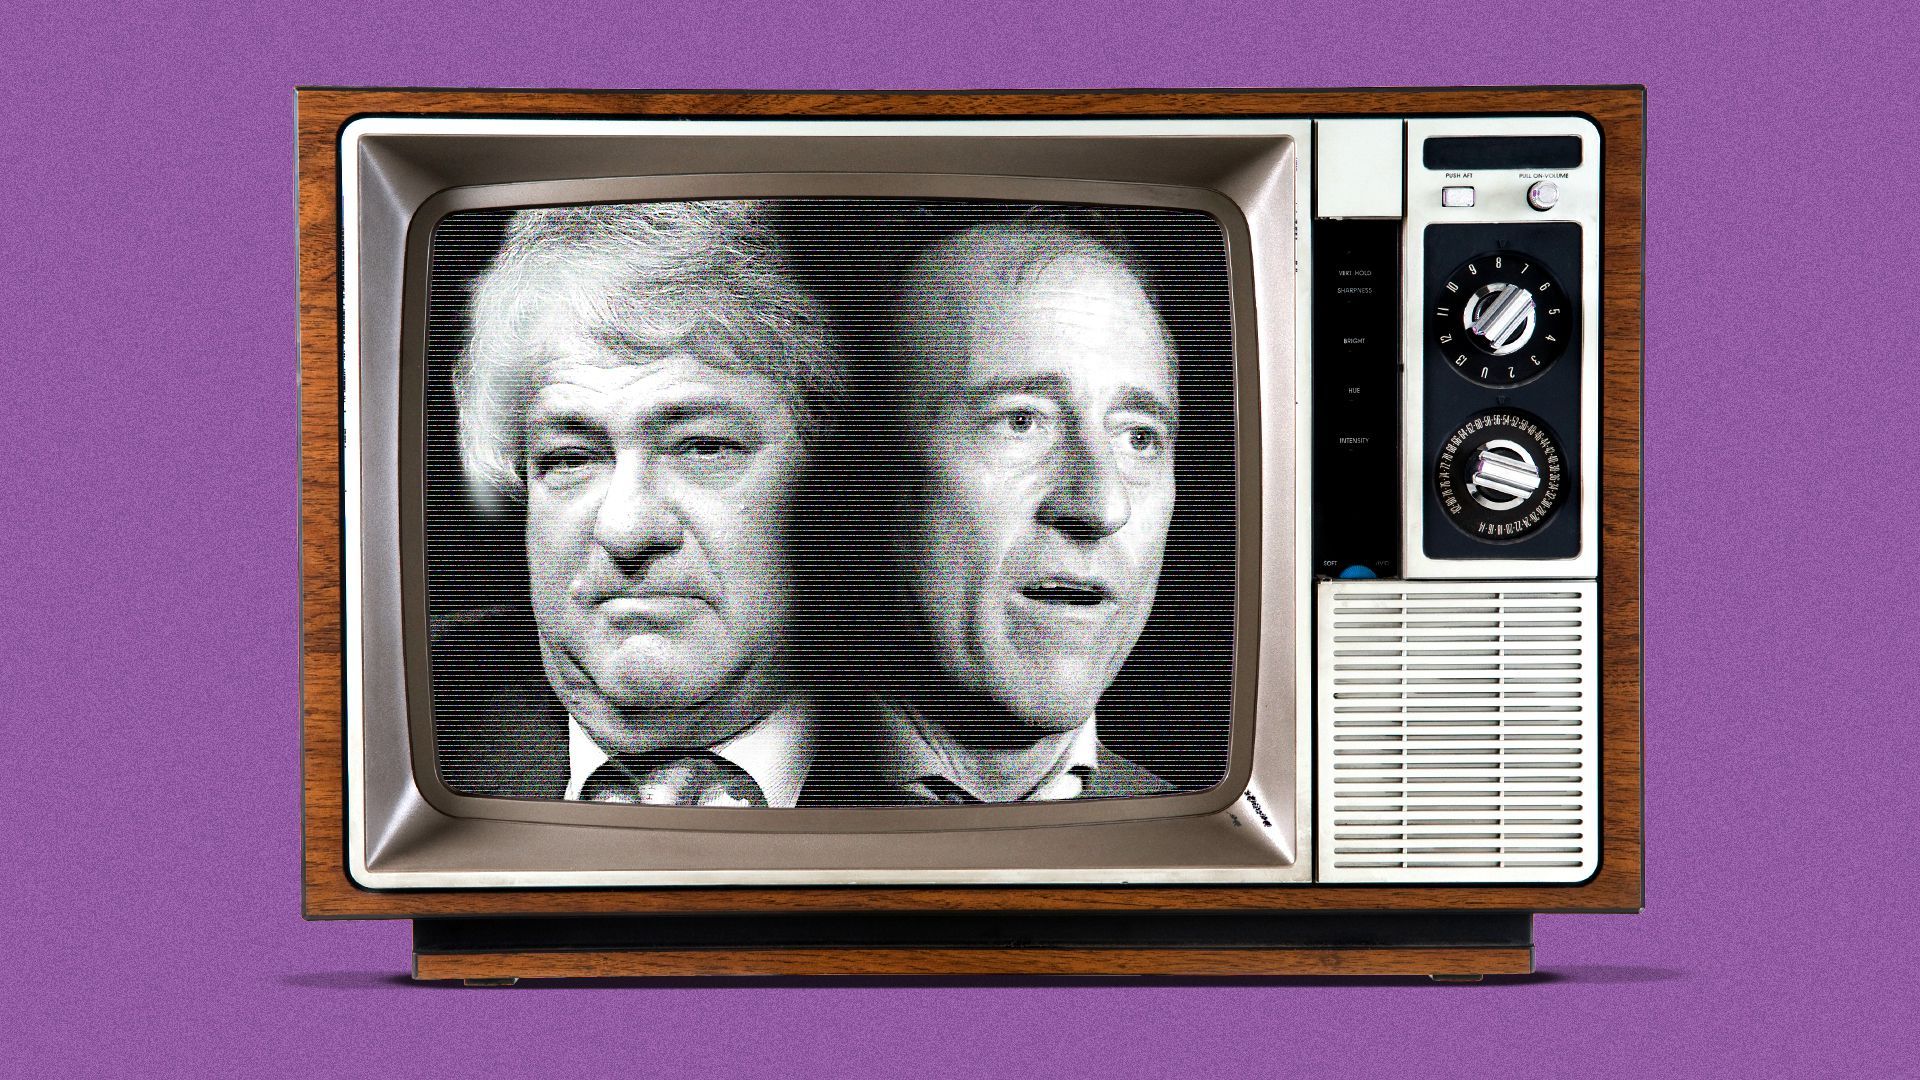 Illustration of an old TV with Leon Black and Josh Harris on it.